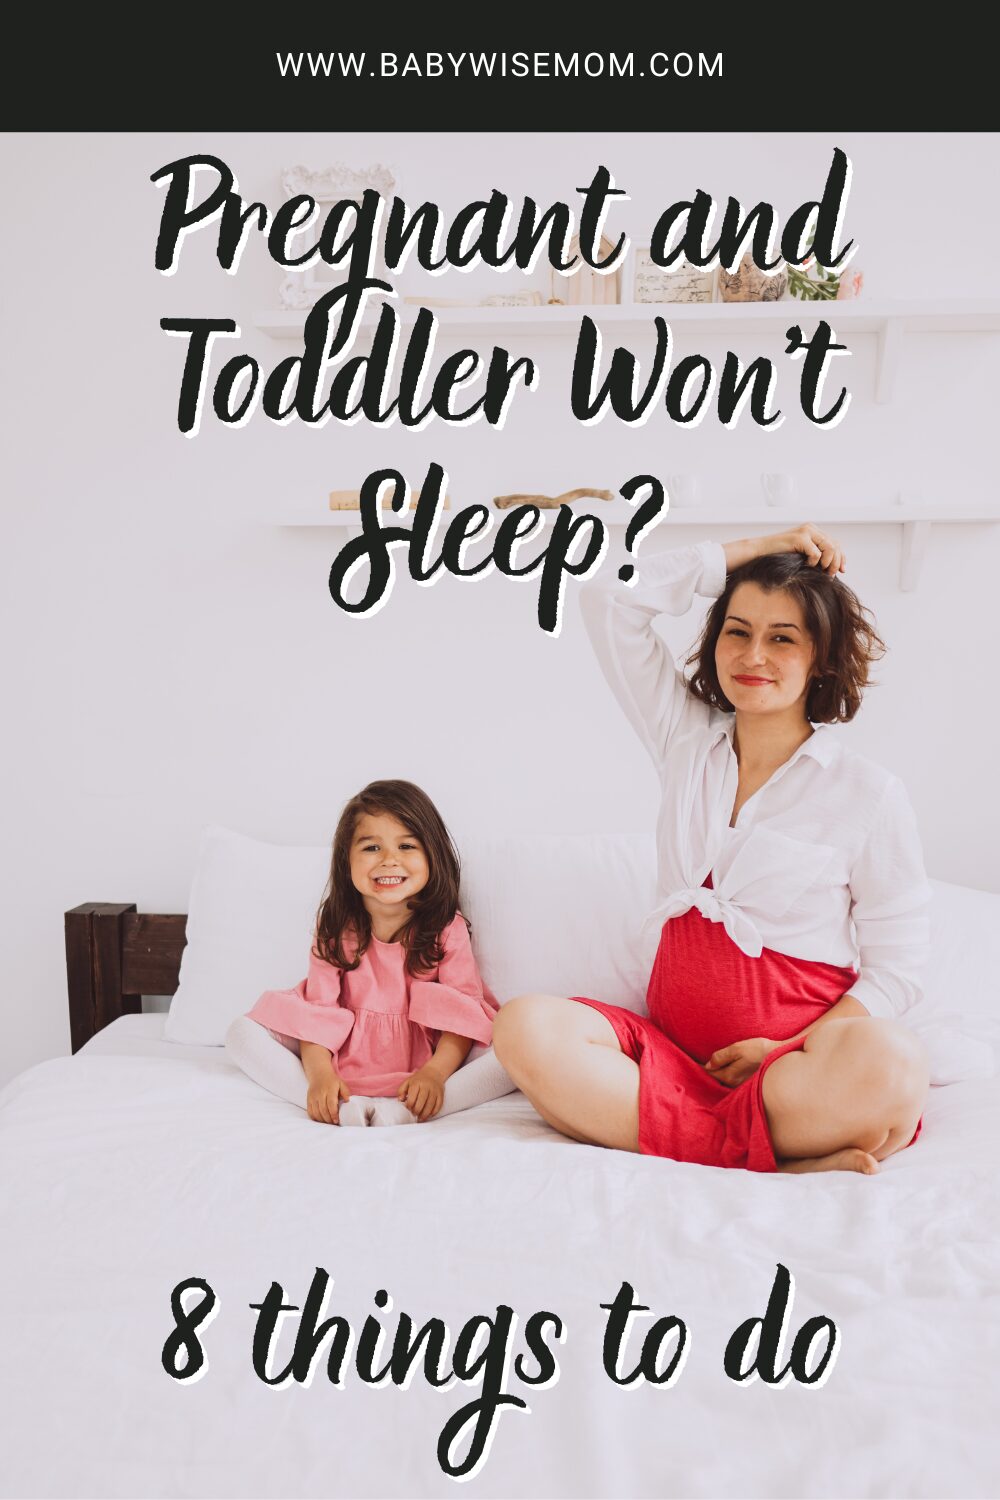 Pregnant and toddler won't sleep pinnable image